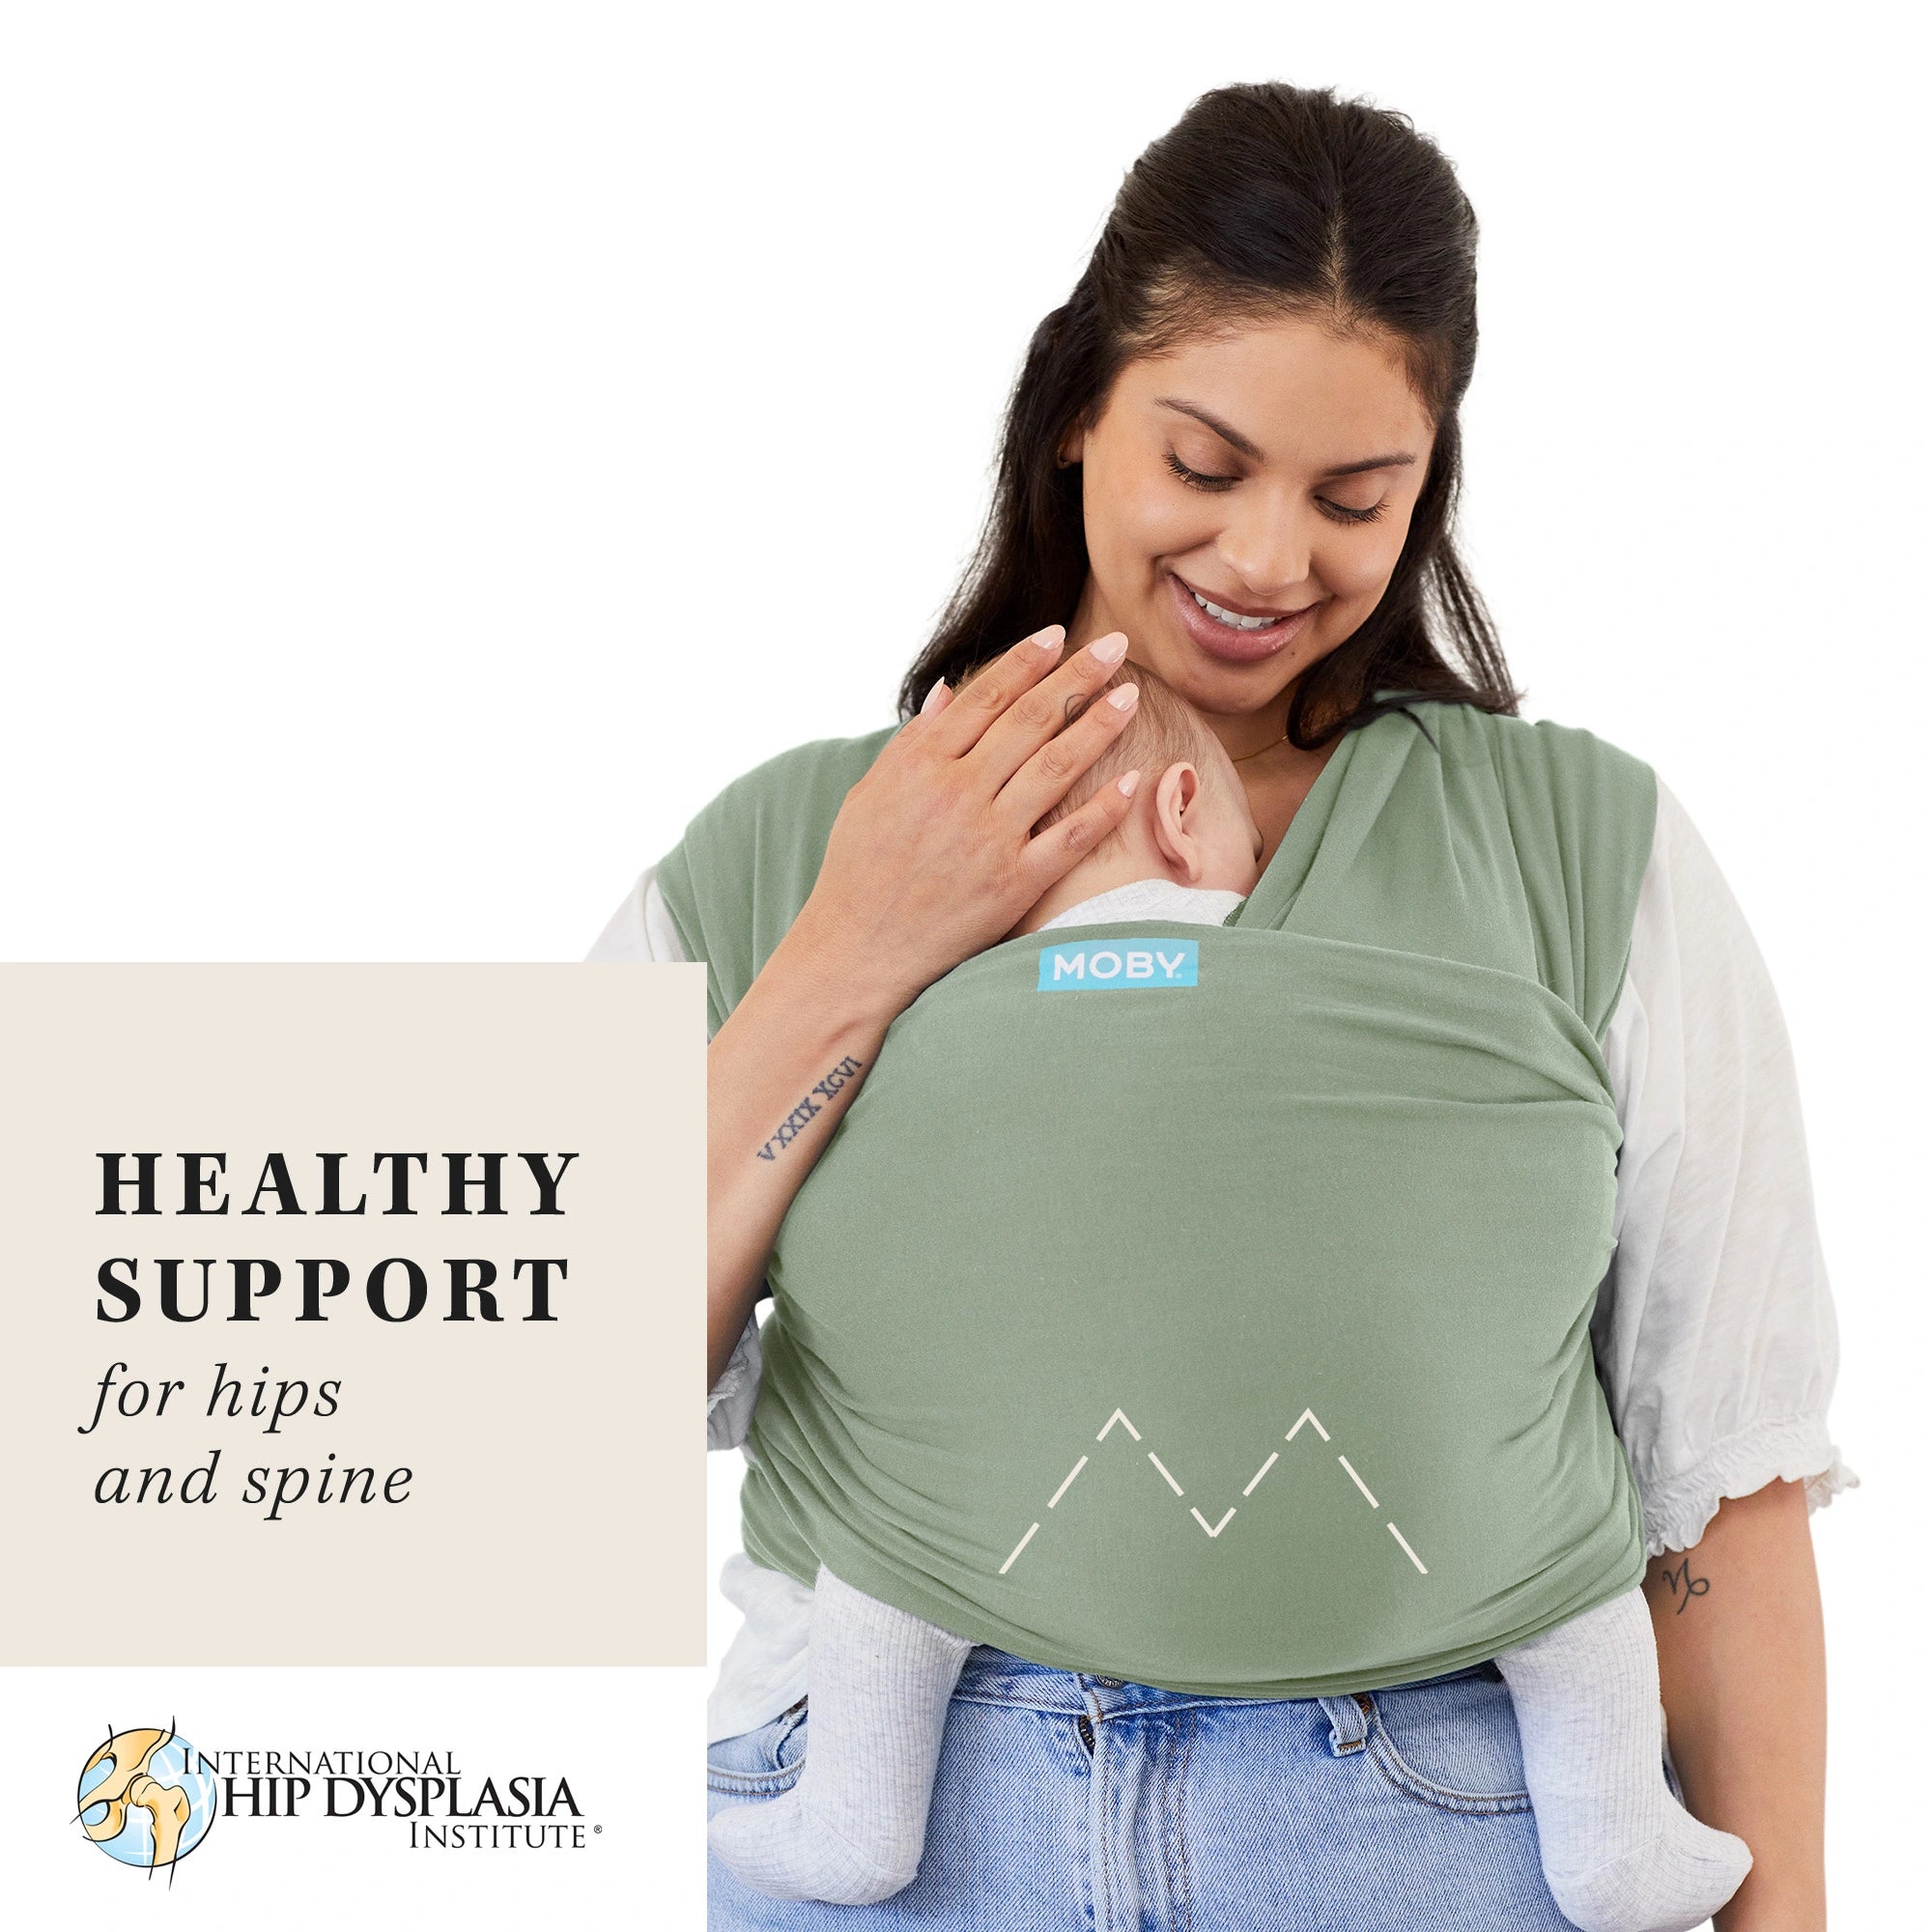 moby wrap features hip healthy support for growing babies as endorsed by the international hip dysplasia institute